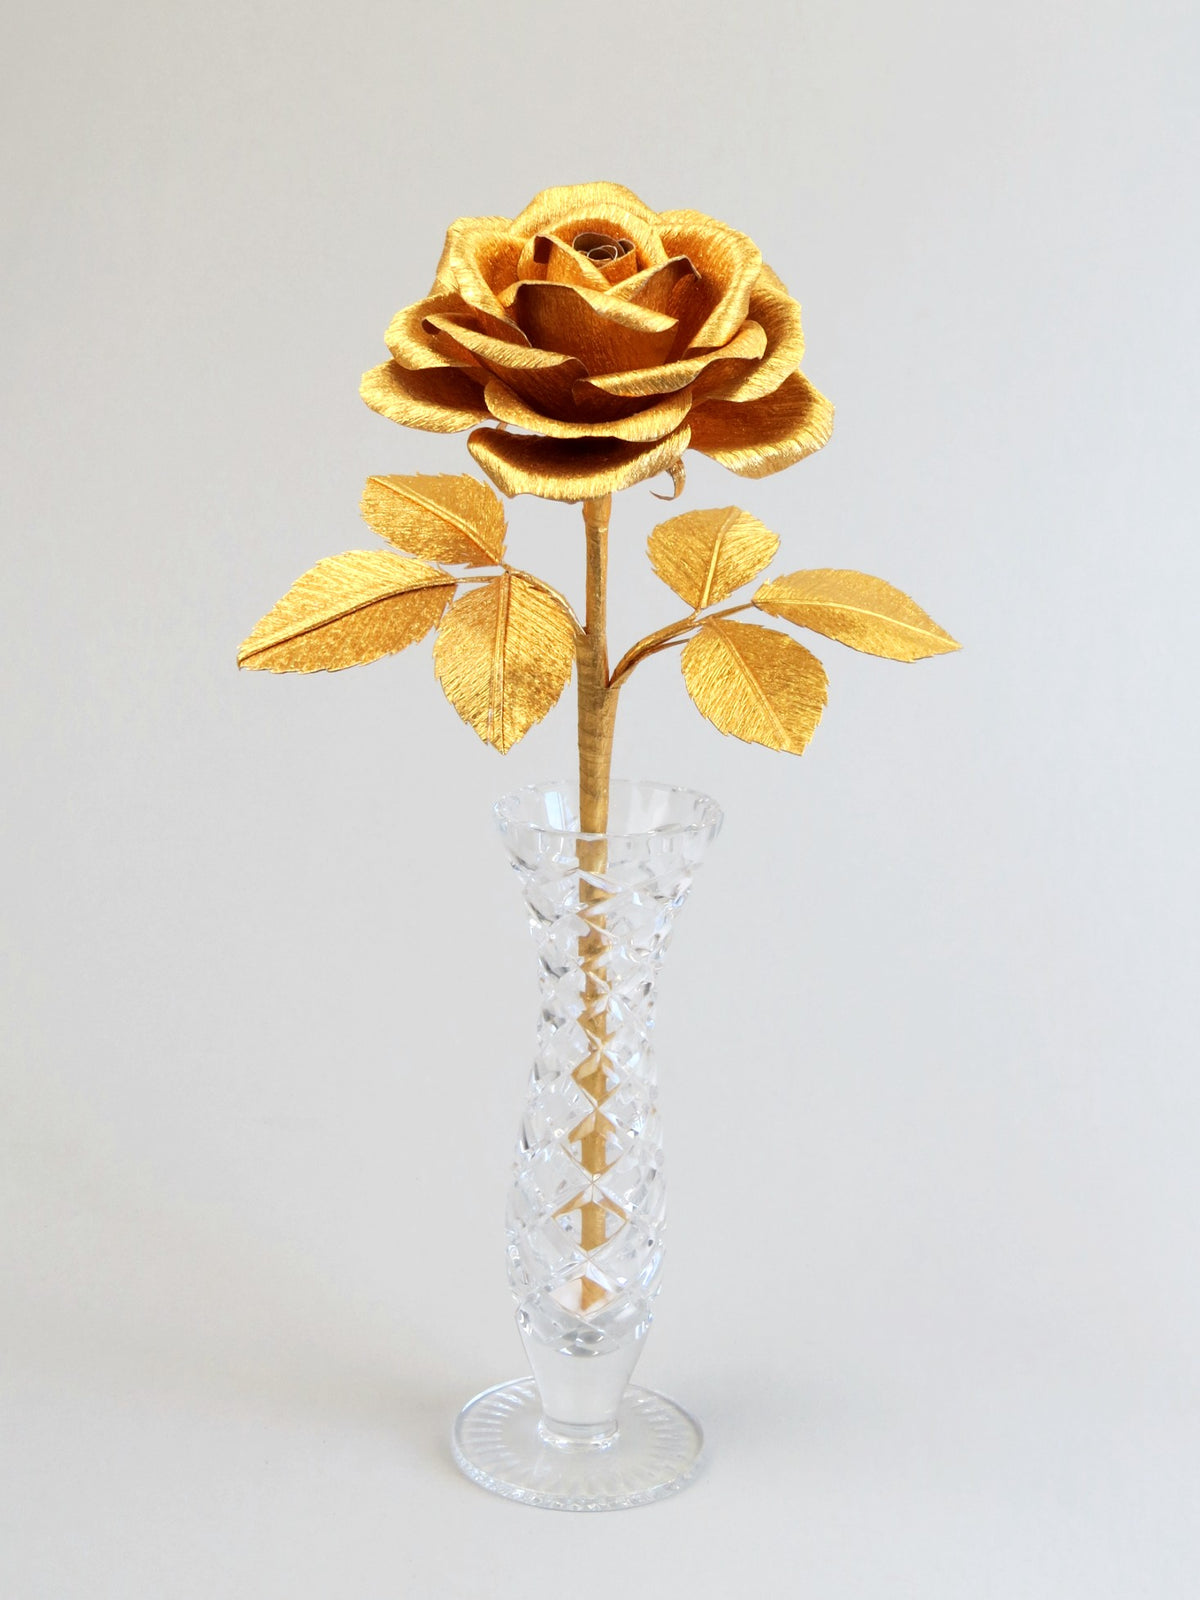 Gold crepe paper rose with six gold leaves standing in a narrow glass vase set against a light grey background